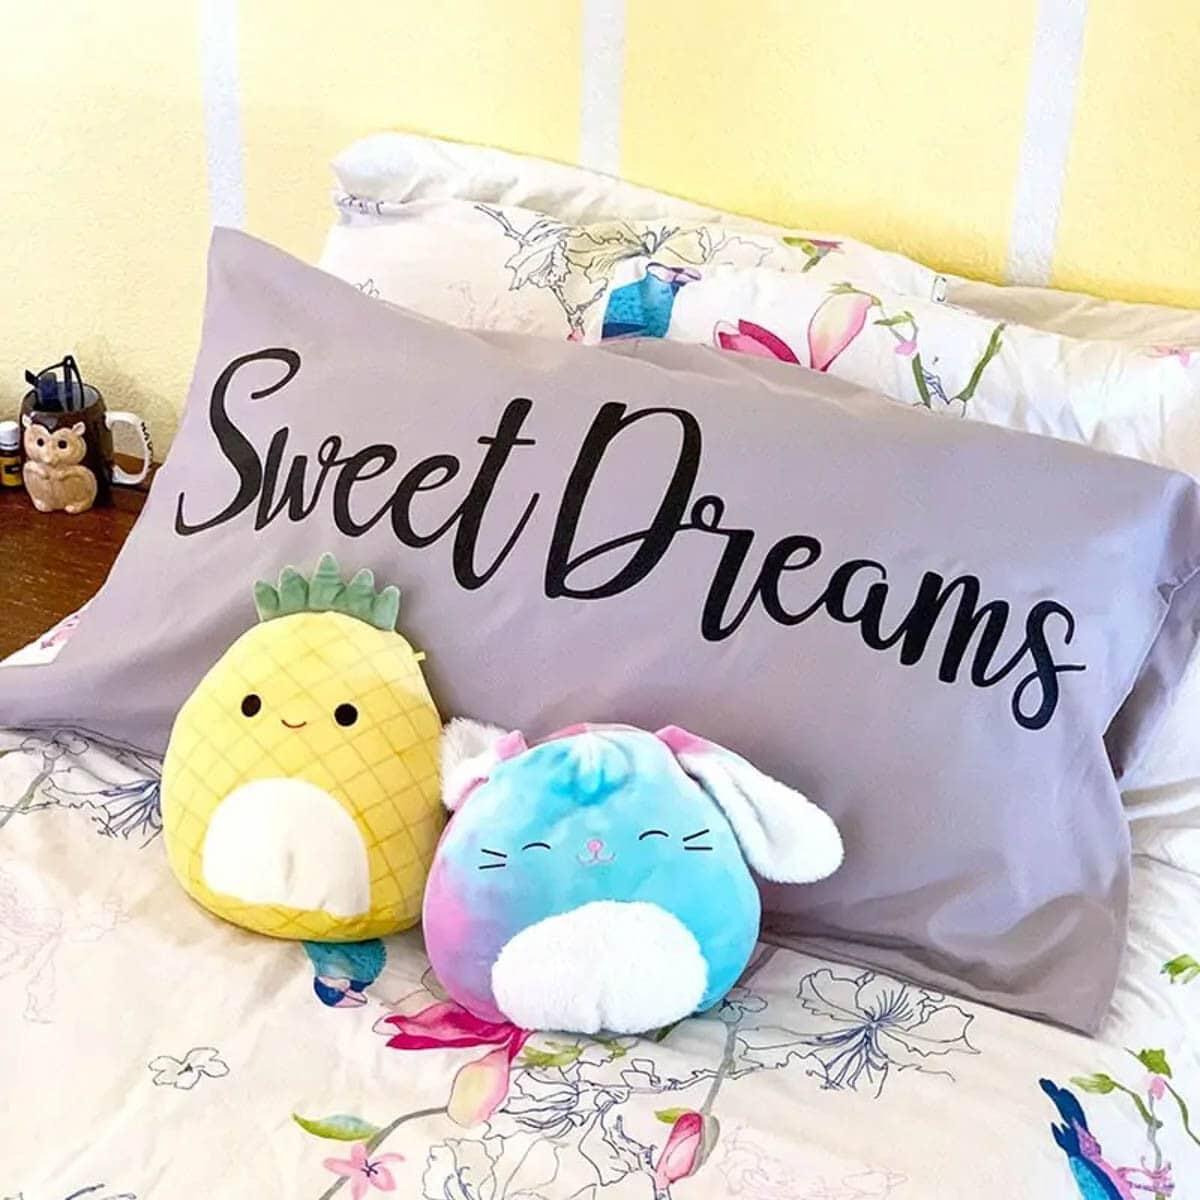 Custom pillow case that says "Sweet Dreams" made with a Cricut